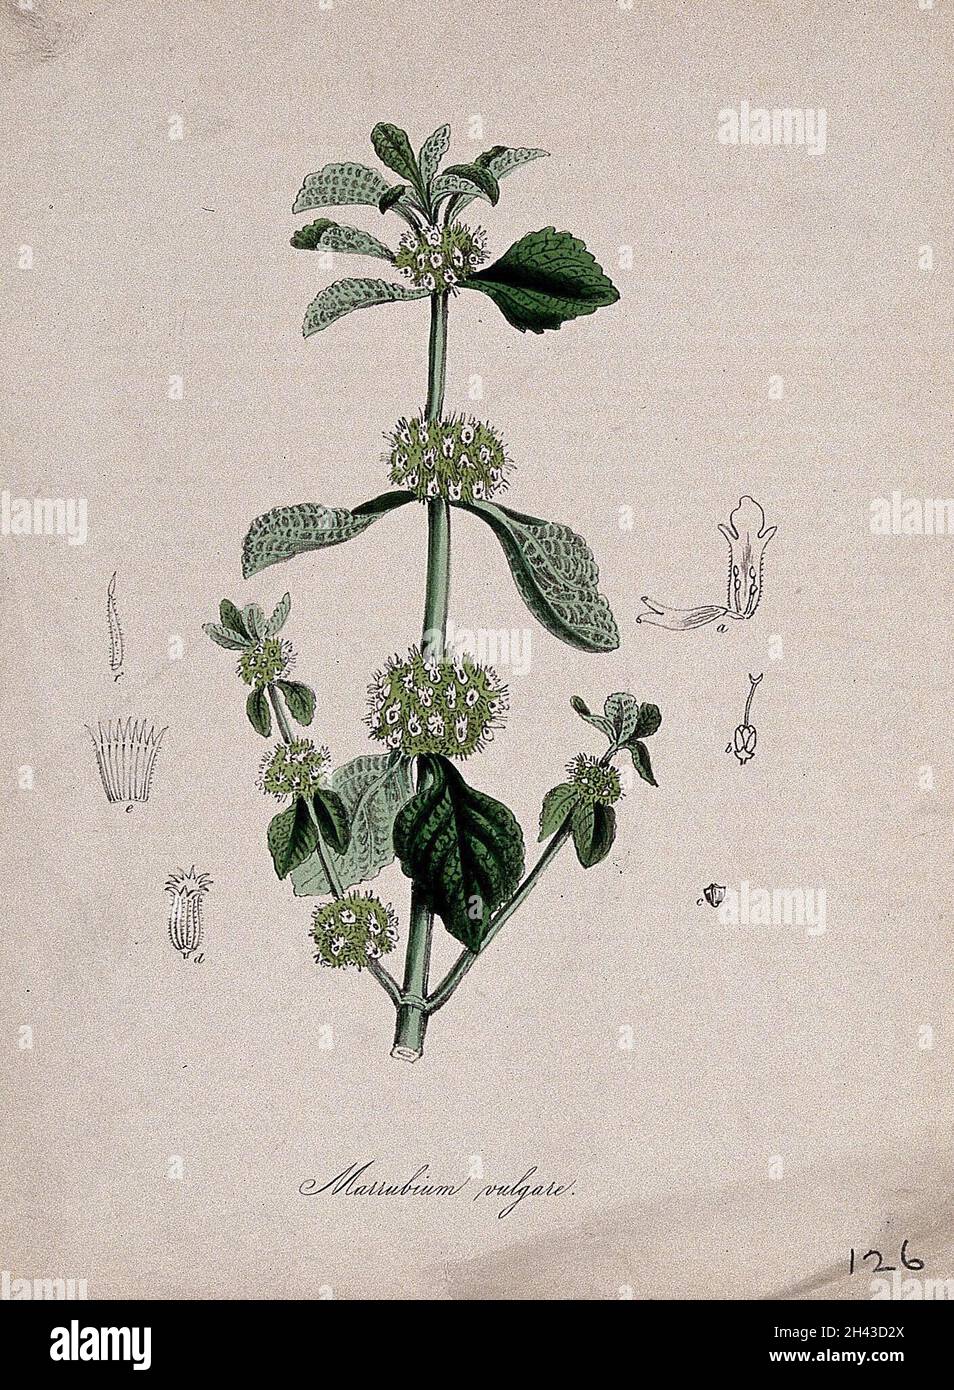 White horehound (Marrubium vulgare): flowering stem with floral sections. Coloured lithograph after M. A. Burnett, c. 1847. Stock Photo